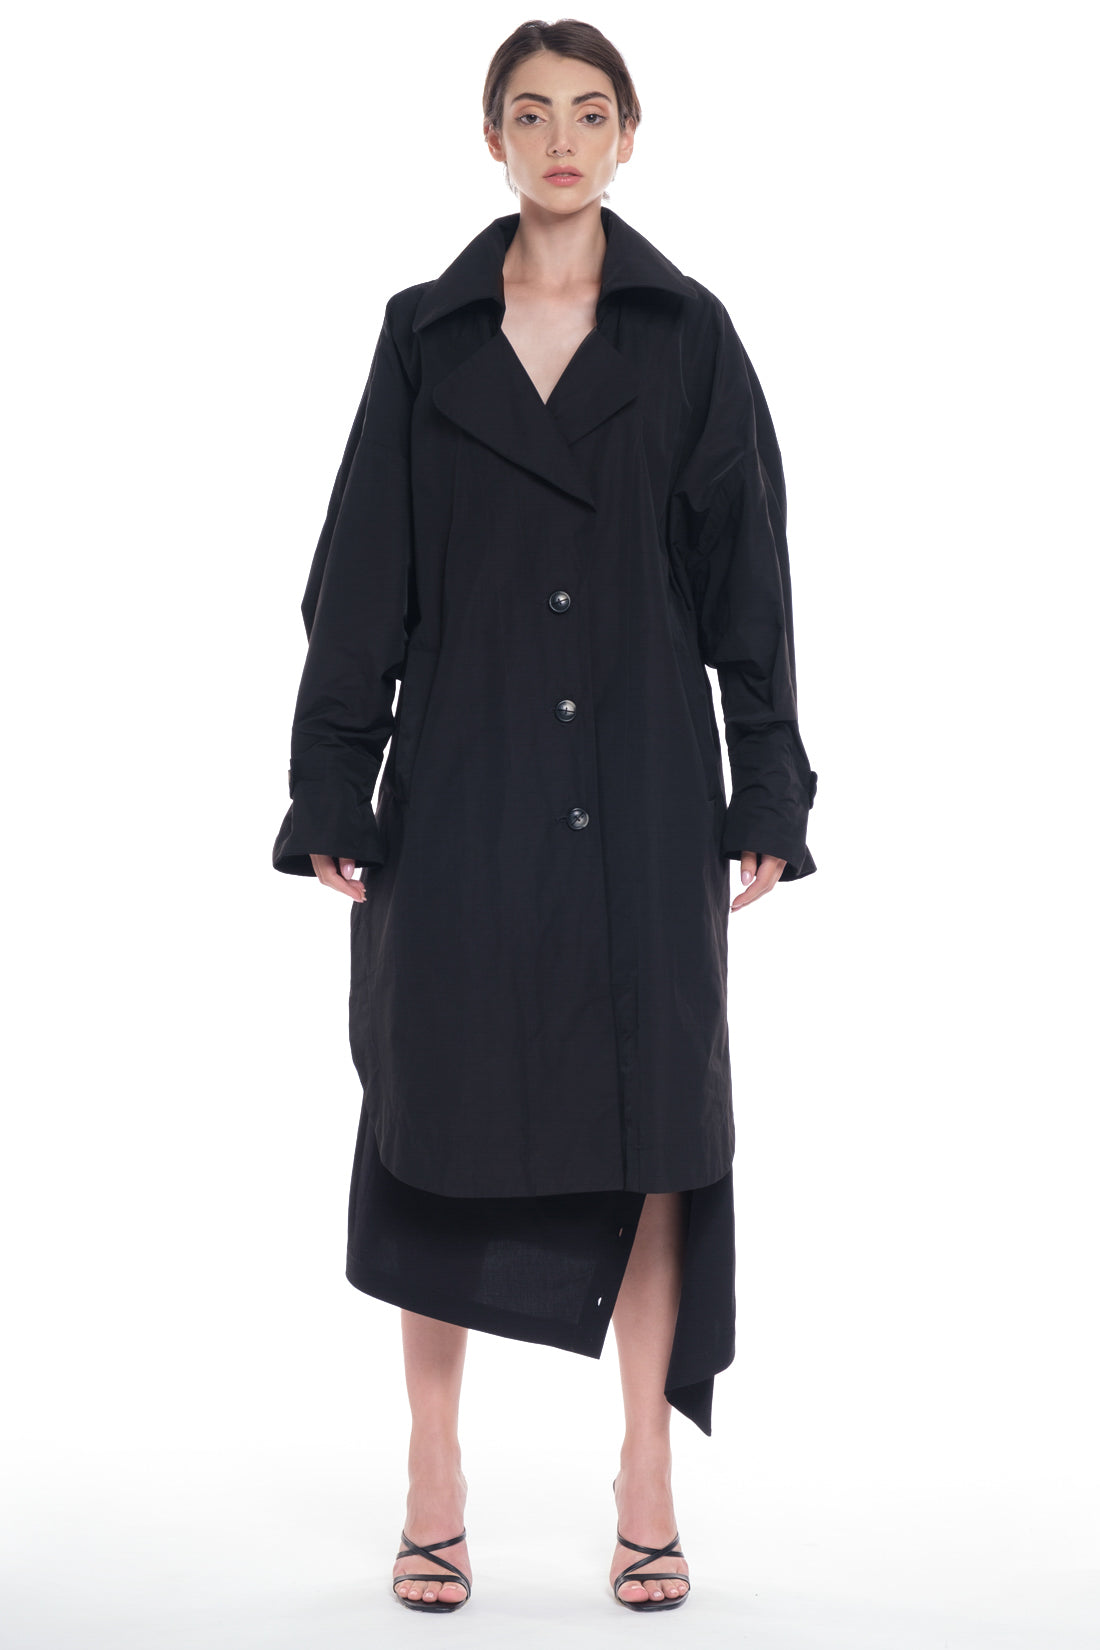 RAIN PROOF TRENCH COAT WITH LONG SLEEVES, BIG COLLAR, IN FRONT BUTTONING 